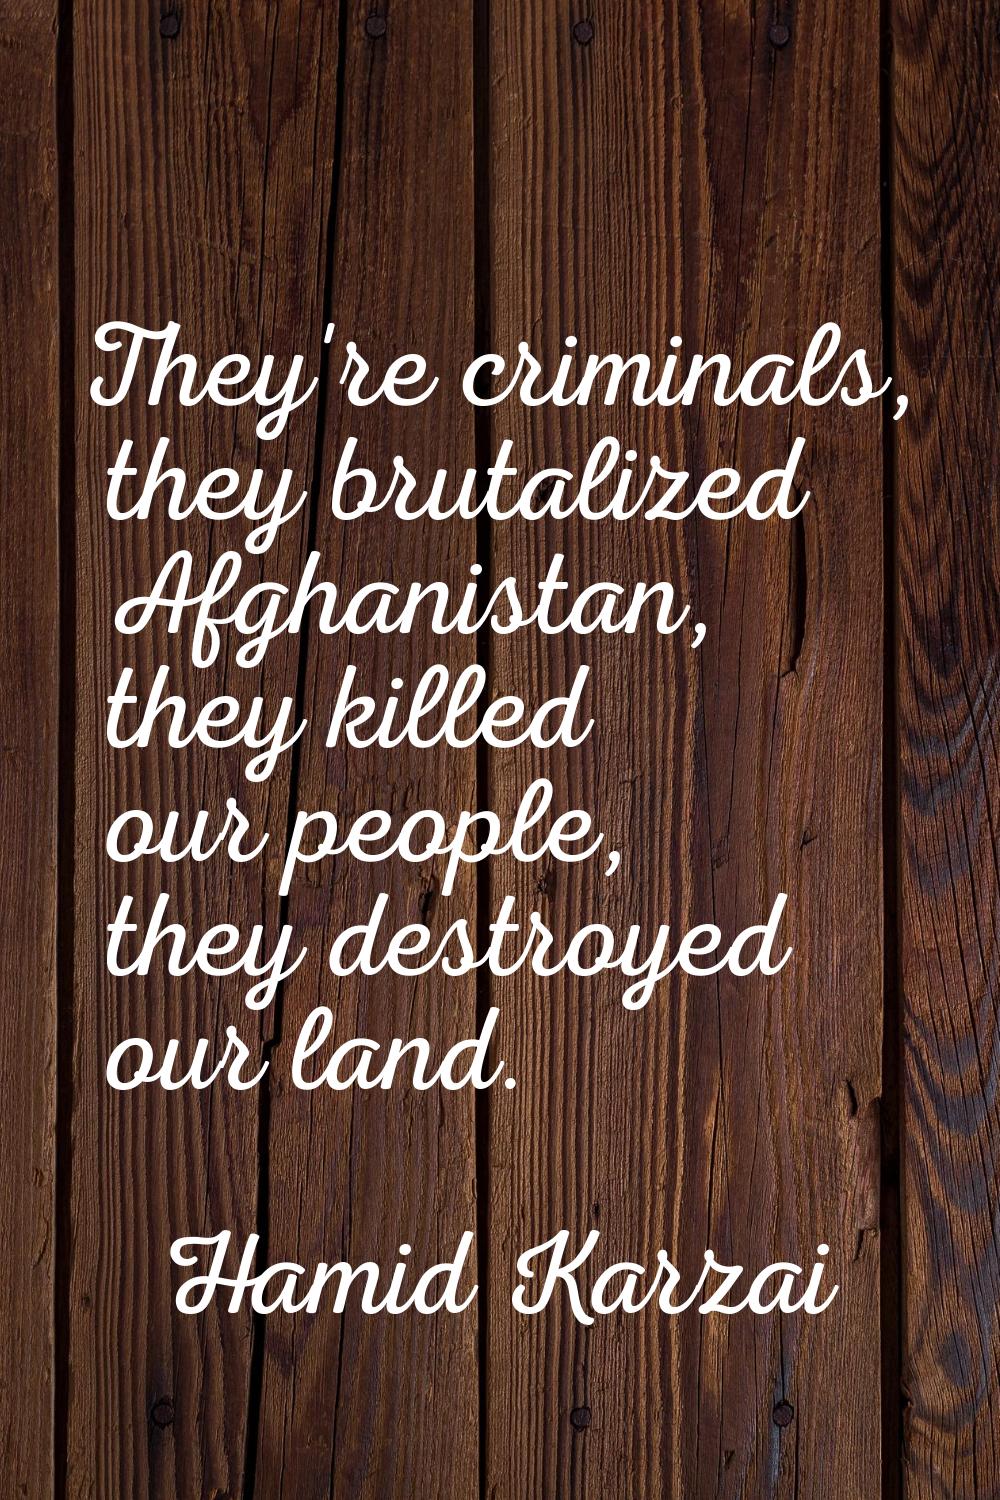 They're criminals, they brutalized Afghanistan, they killed our people, they destroyed our land.